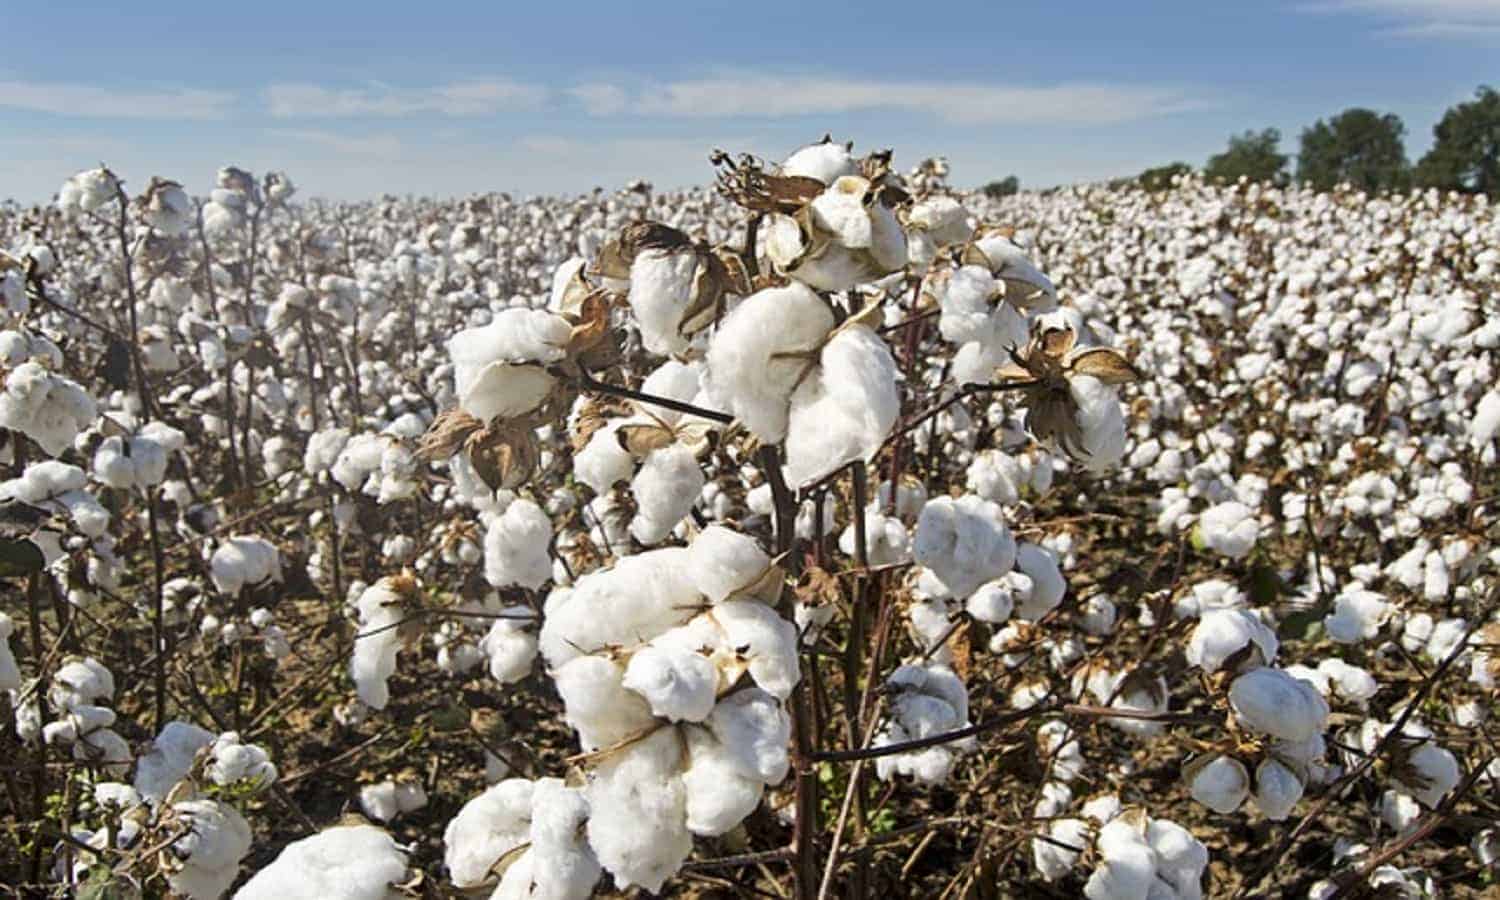 Arab Cotton Ginning’s consolidated profits soar 120.8% YoY in FY2022/23